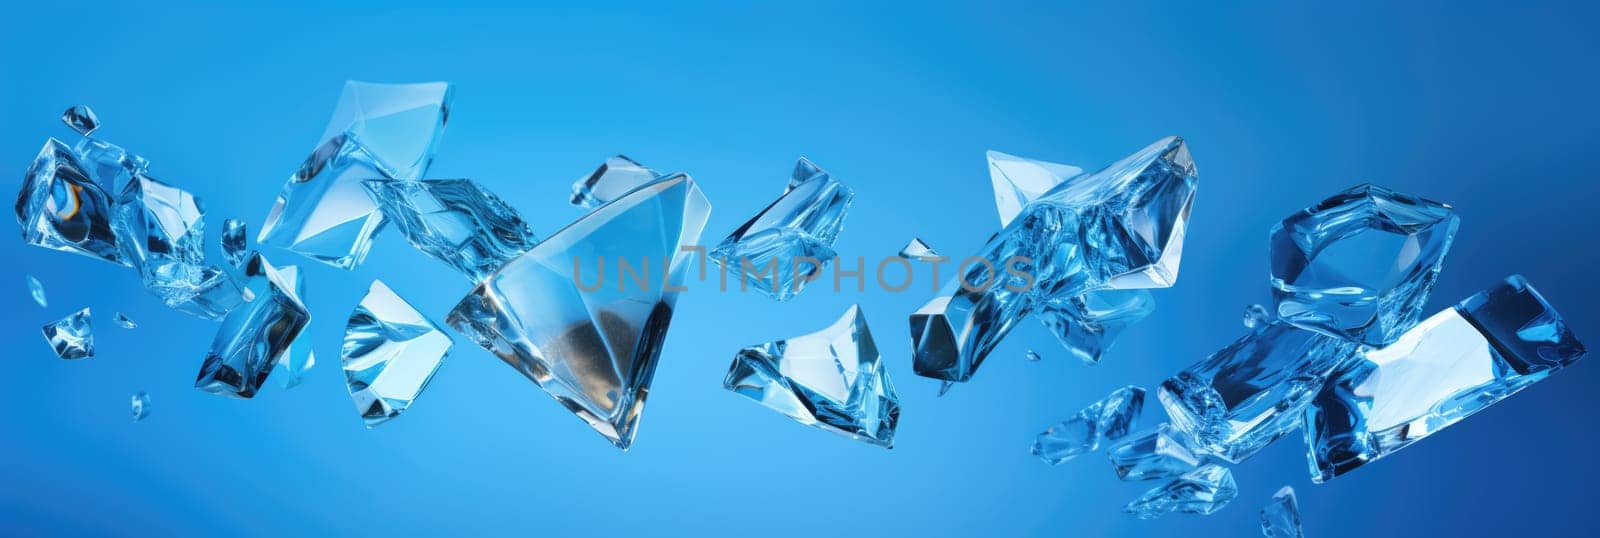 Flying glass fragments on a blue background. Wide format banner AI